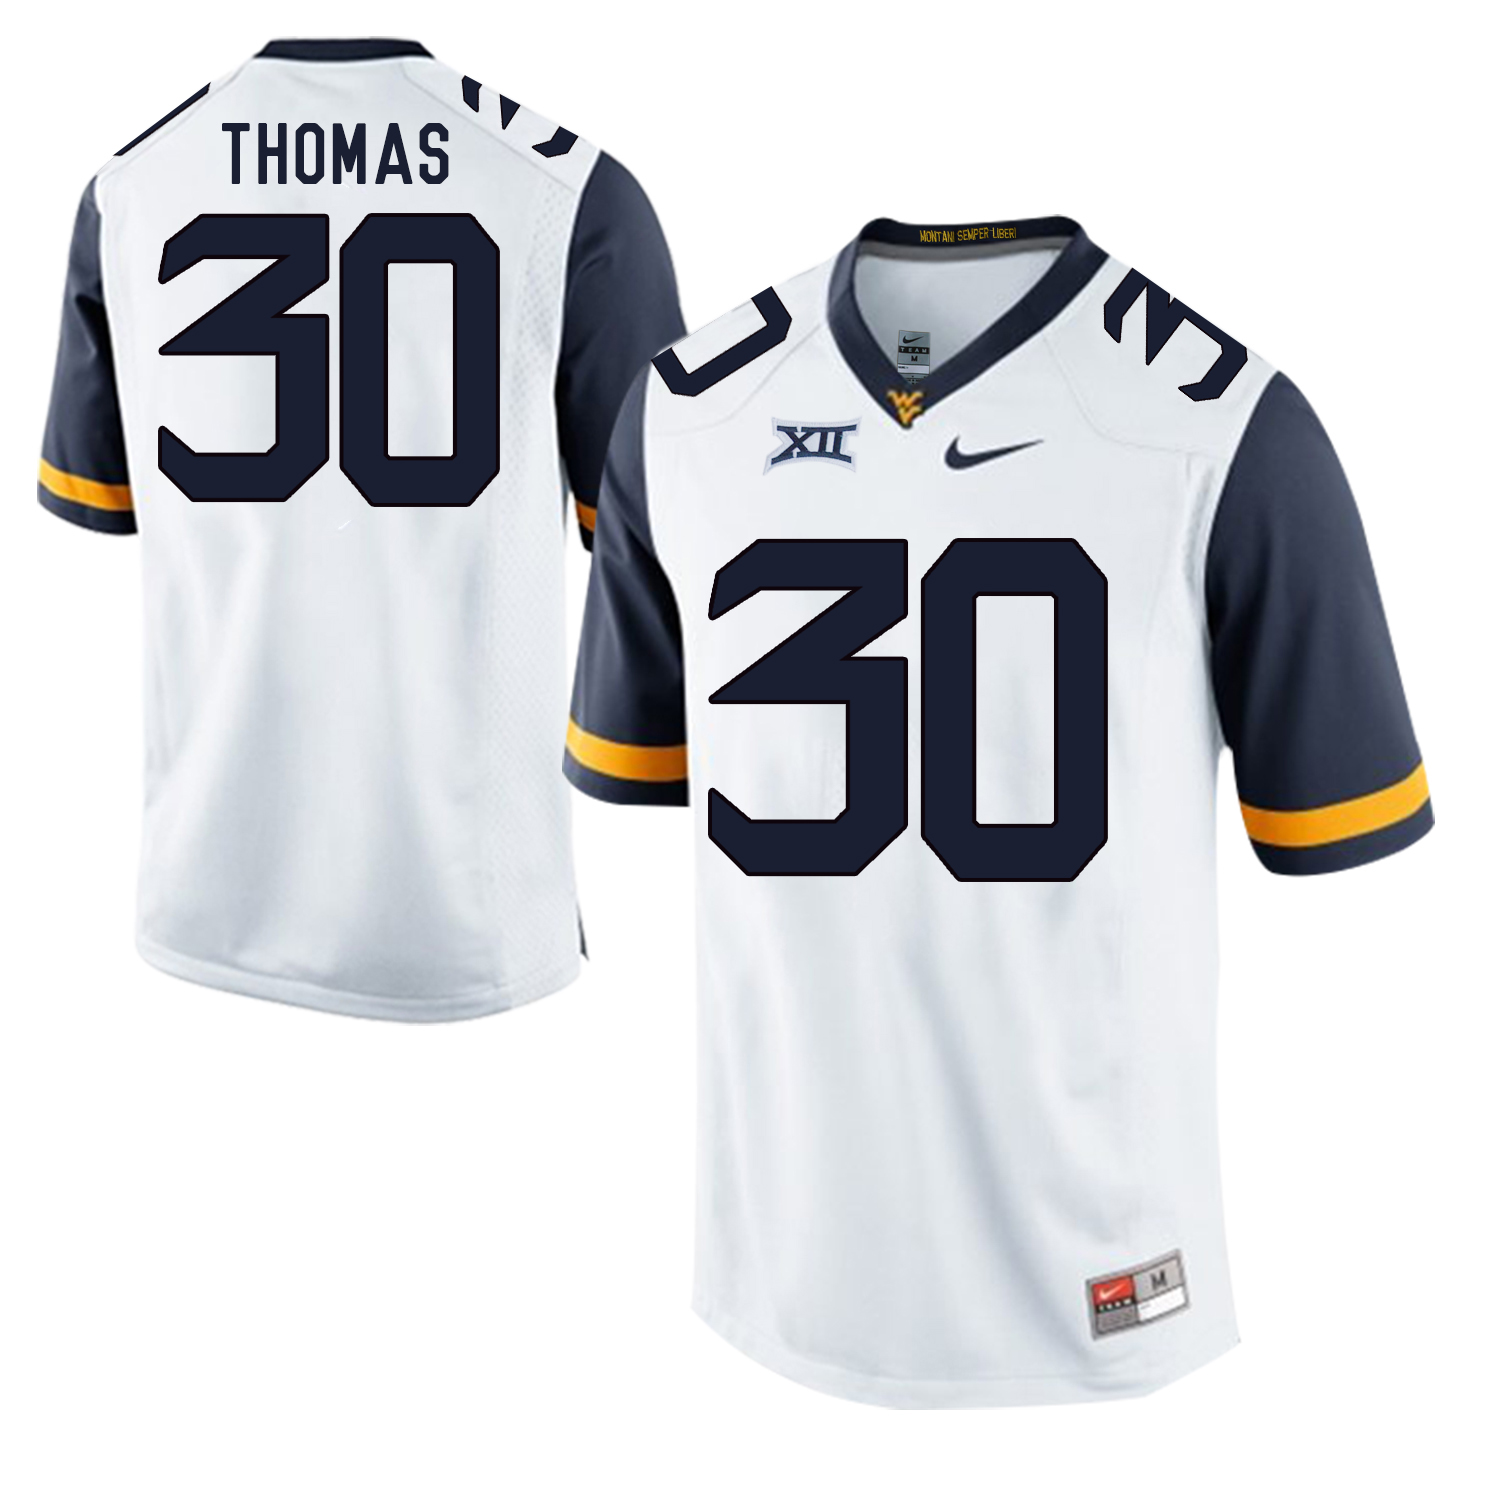 West Virginia Mountaineers 30 J.T. Thomas White College Football Jersey